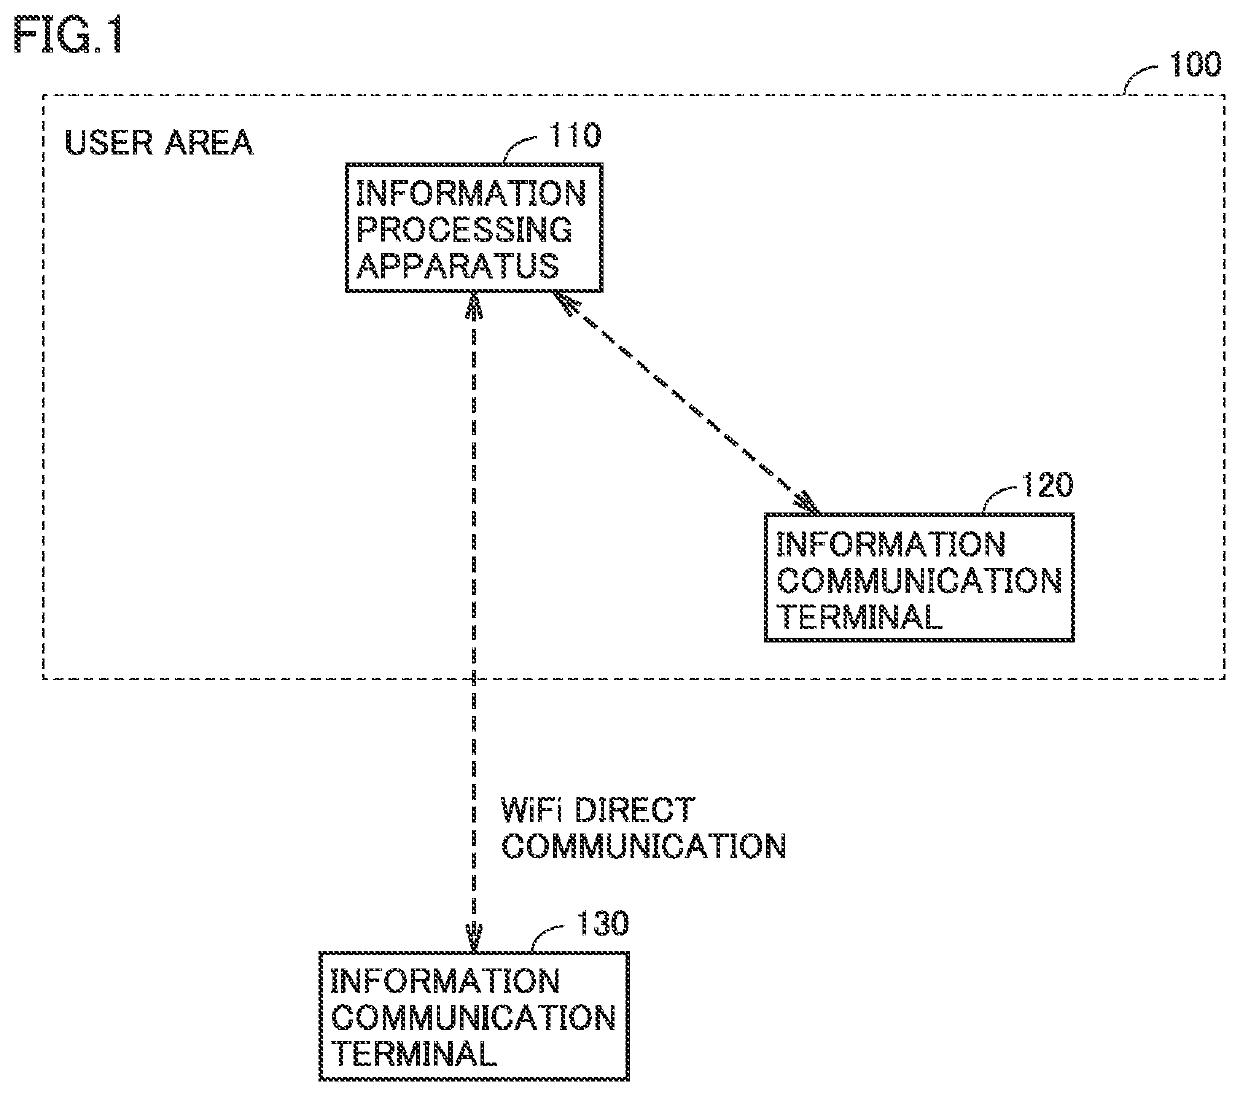 Information processing apparatus, portable communication terminal, and non-transitory computer-readable data recording medium having program for controlling information processing apparatus or portable communication terminal recorded thereon